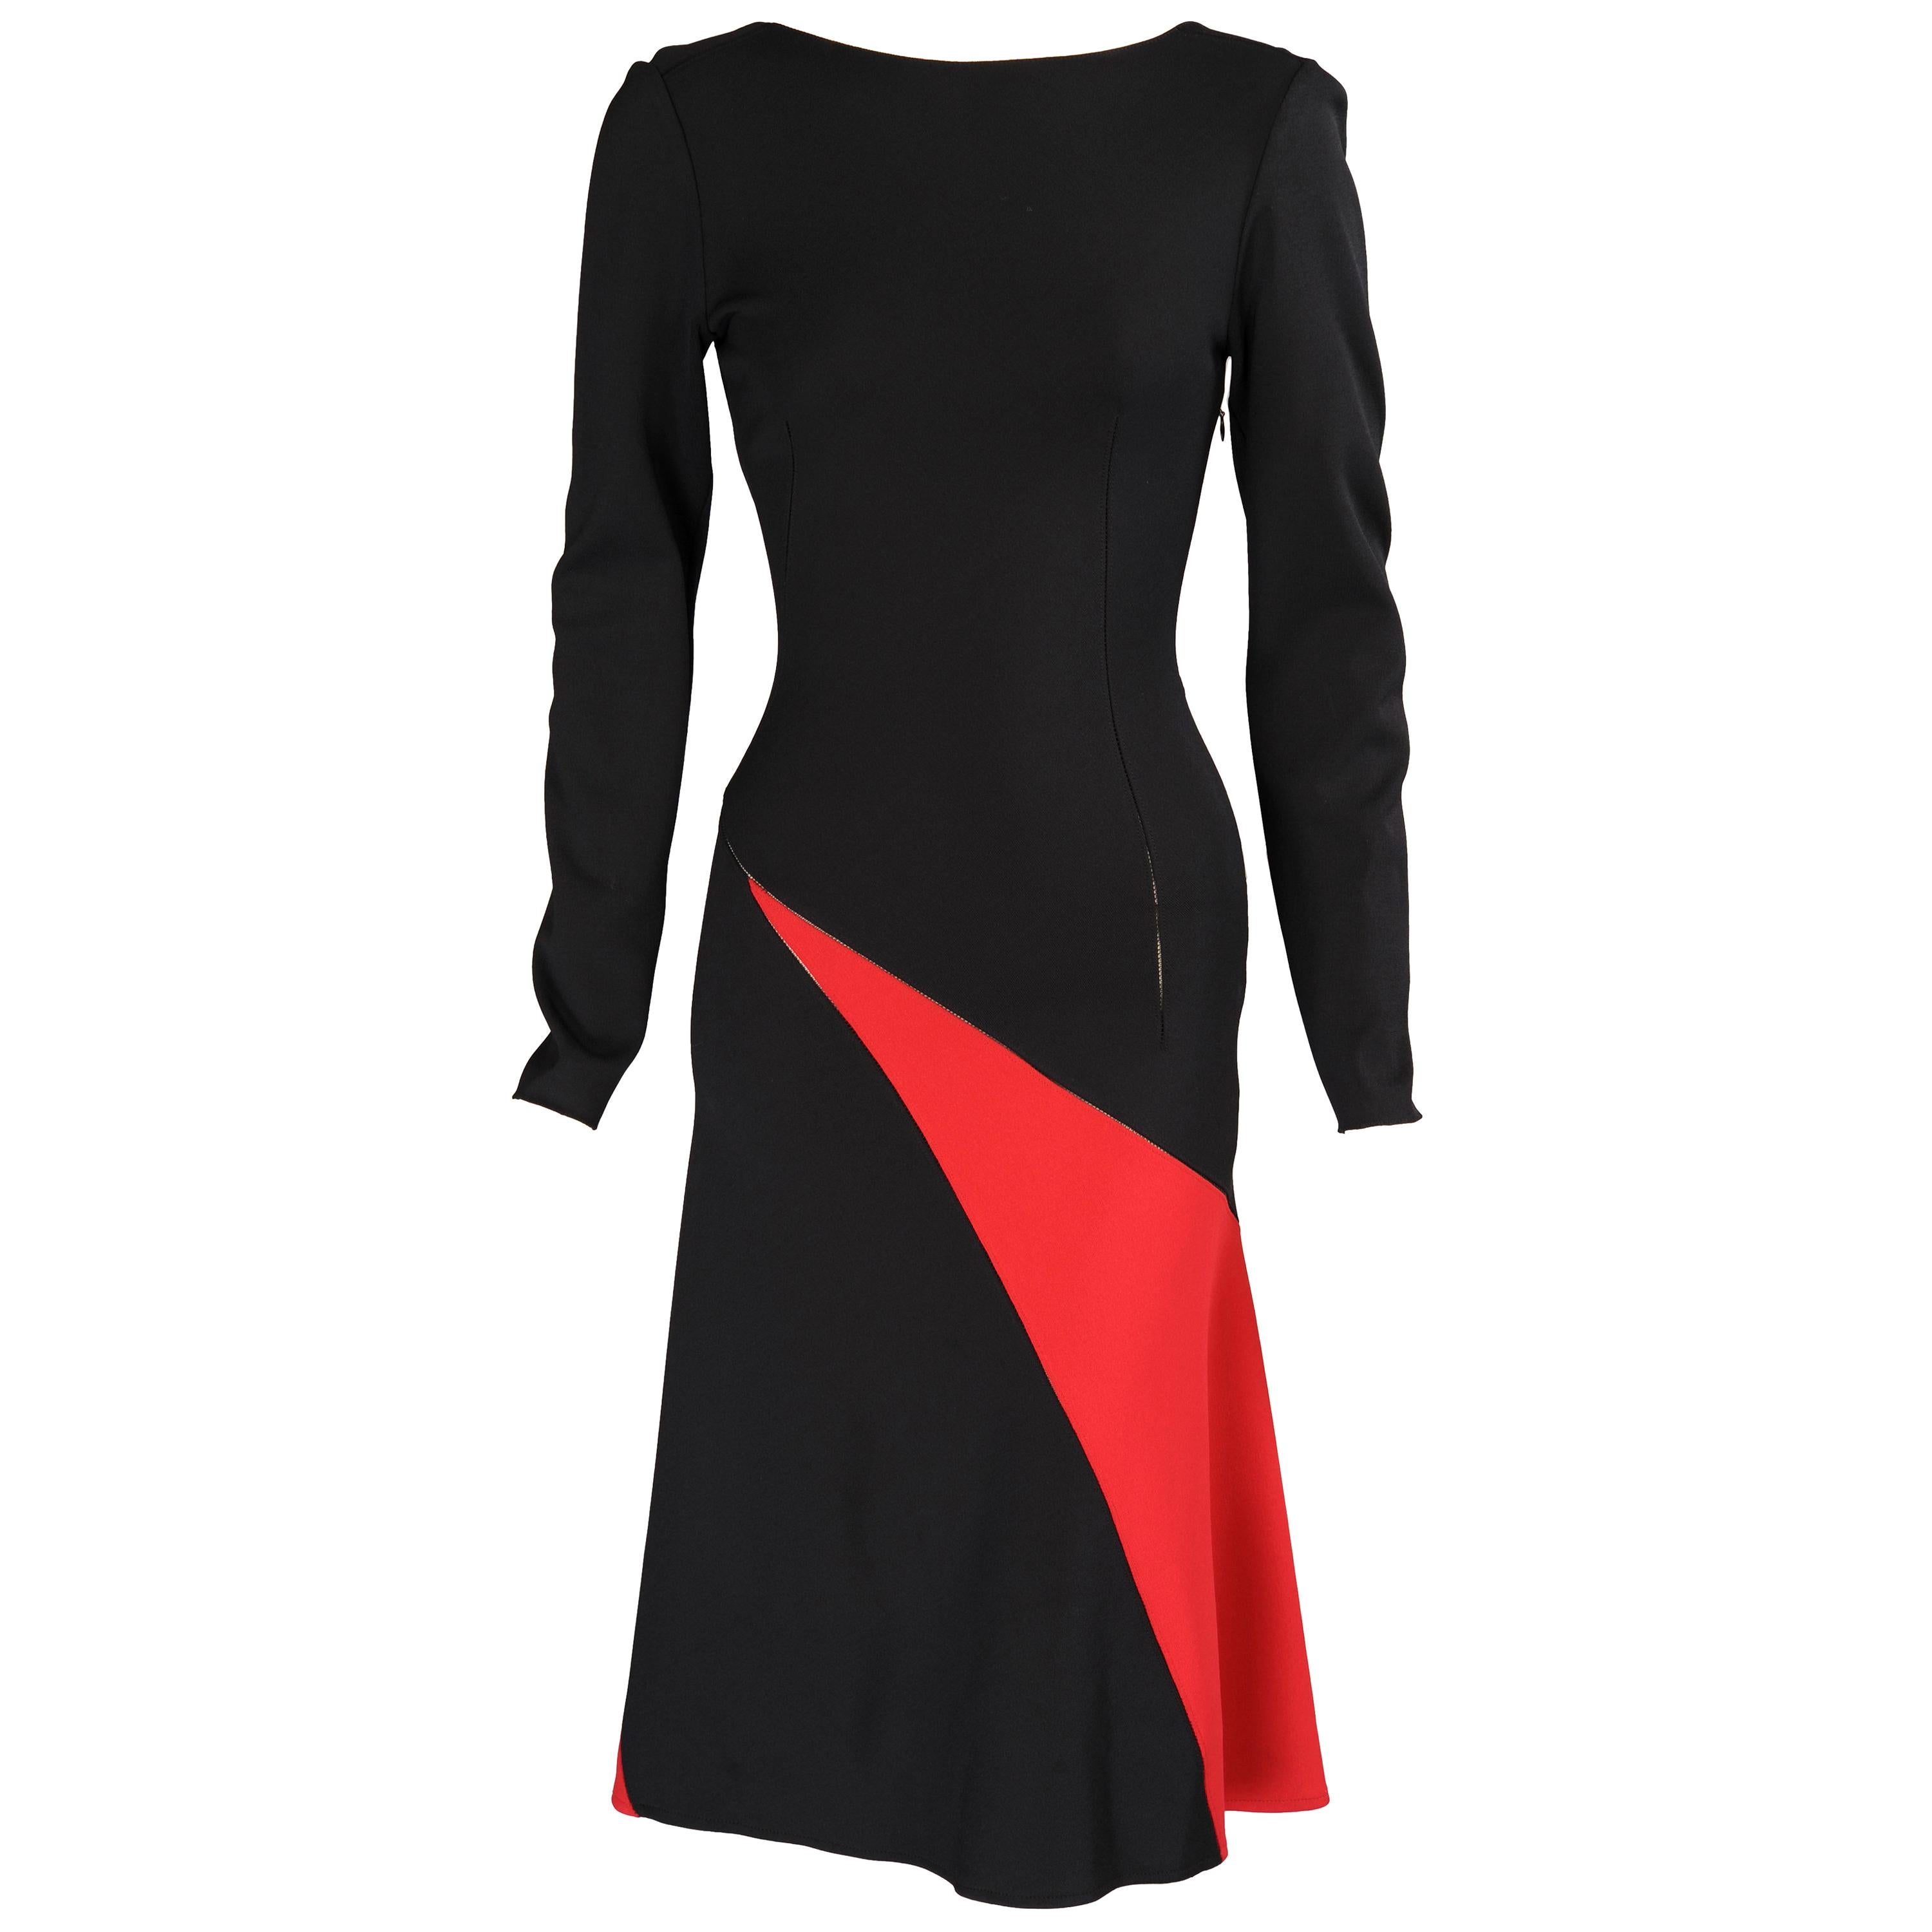 Alaia Graphic Black & Red Dress with Open Seams & Low Back